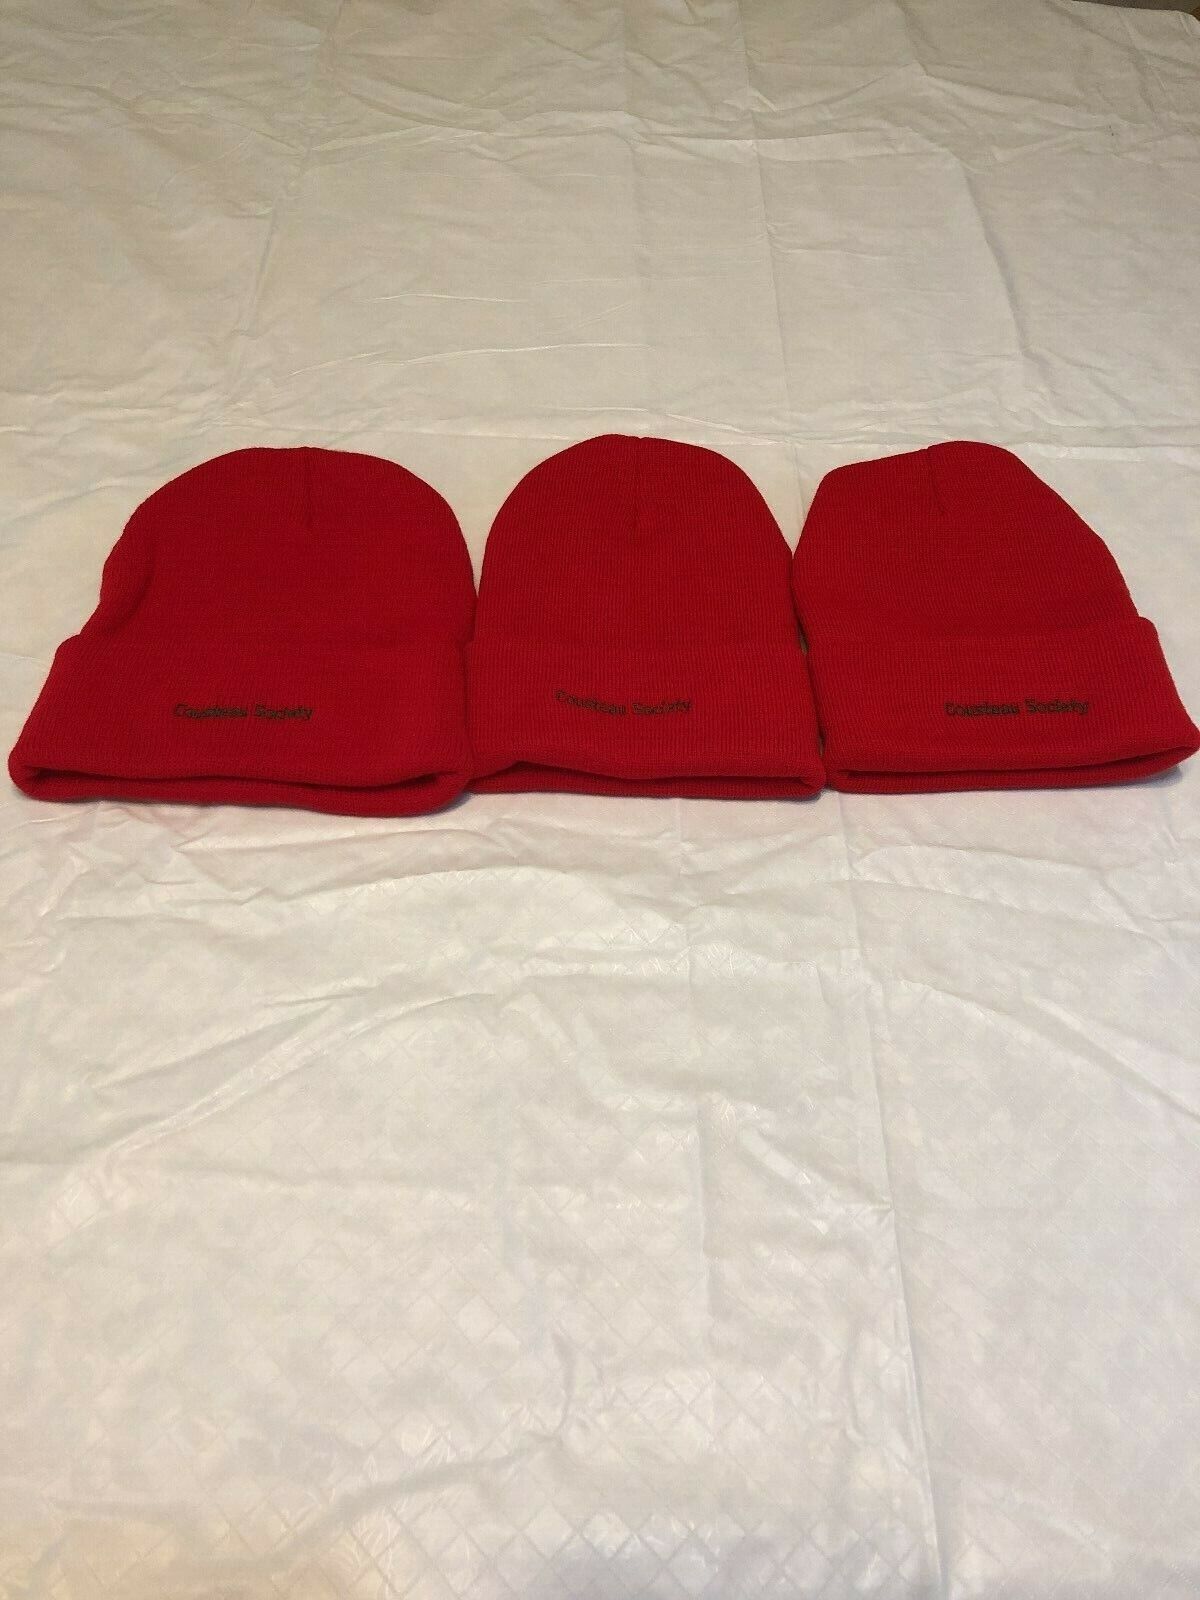 UNISEX SET OF 3 COUSTEAU SOCIETY RED CAPS NEW COLD WEATHER HATS